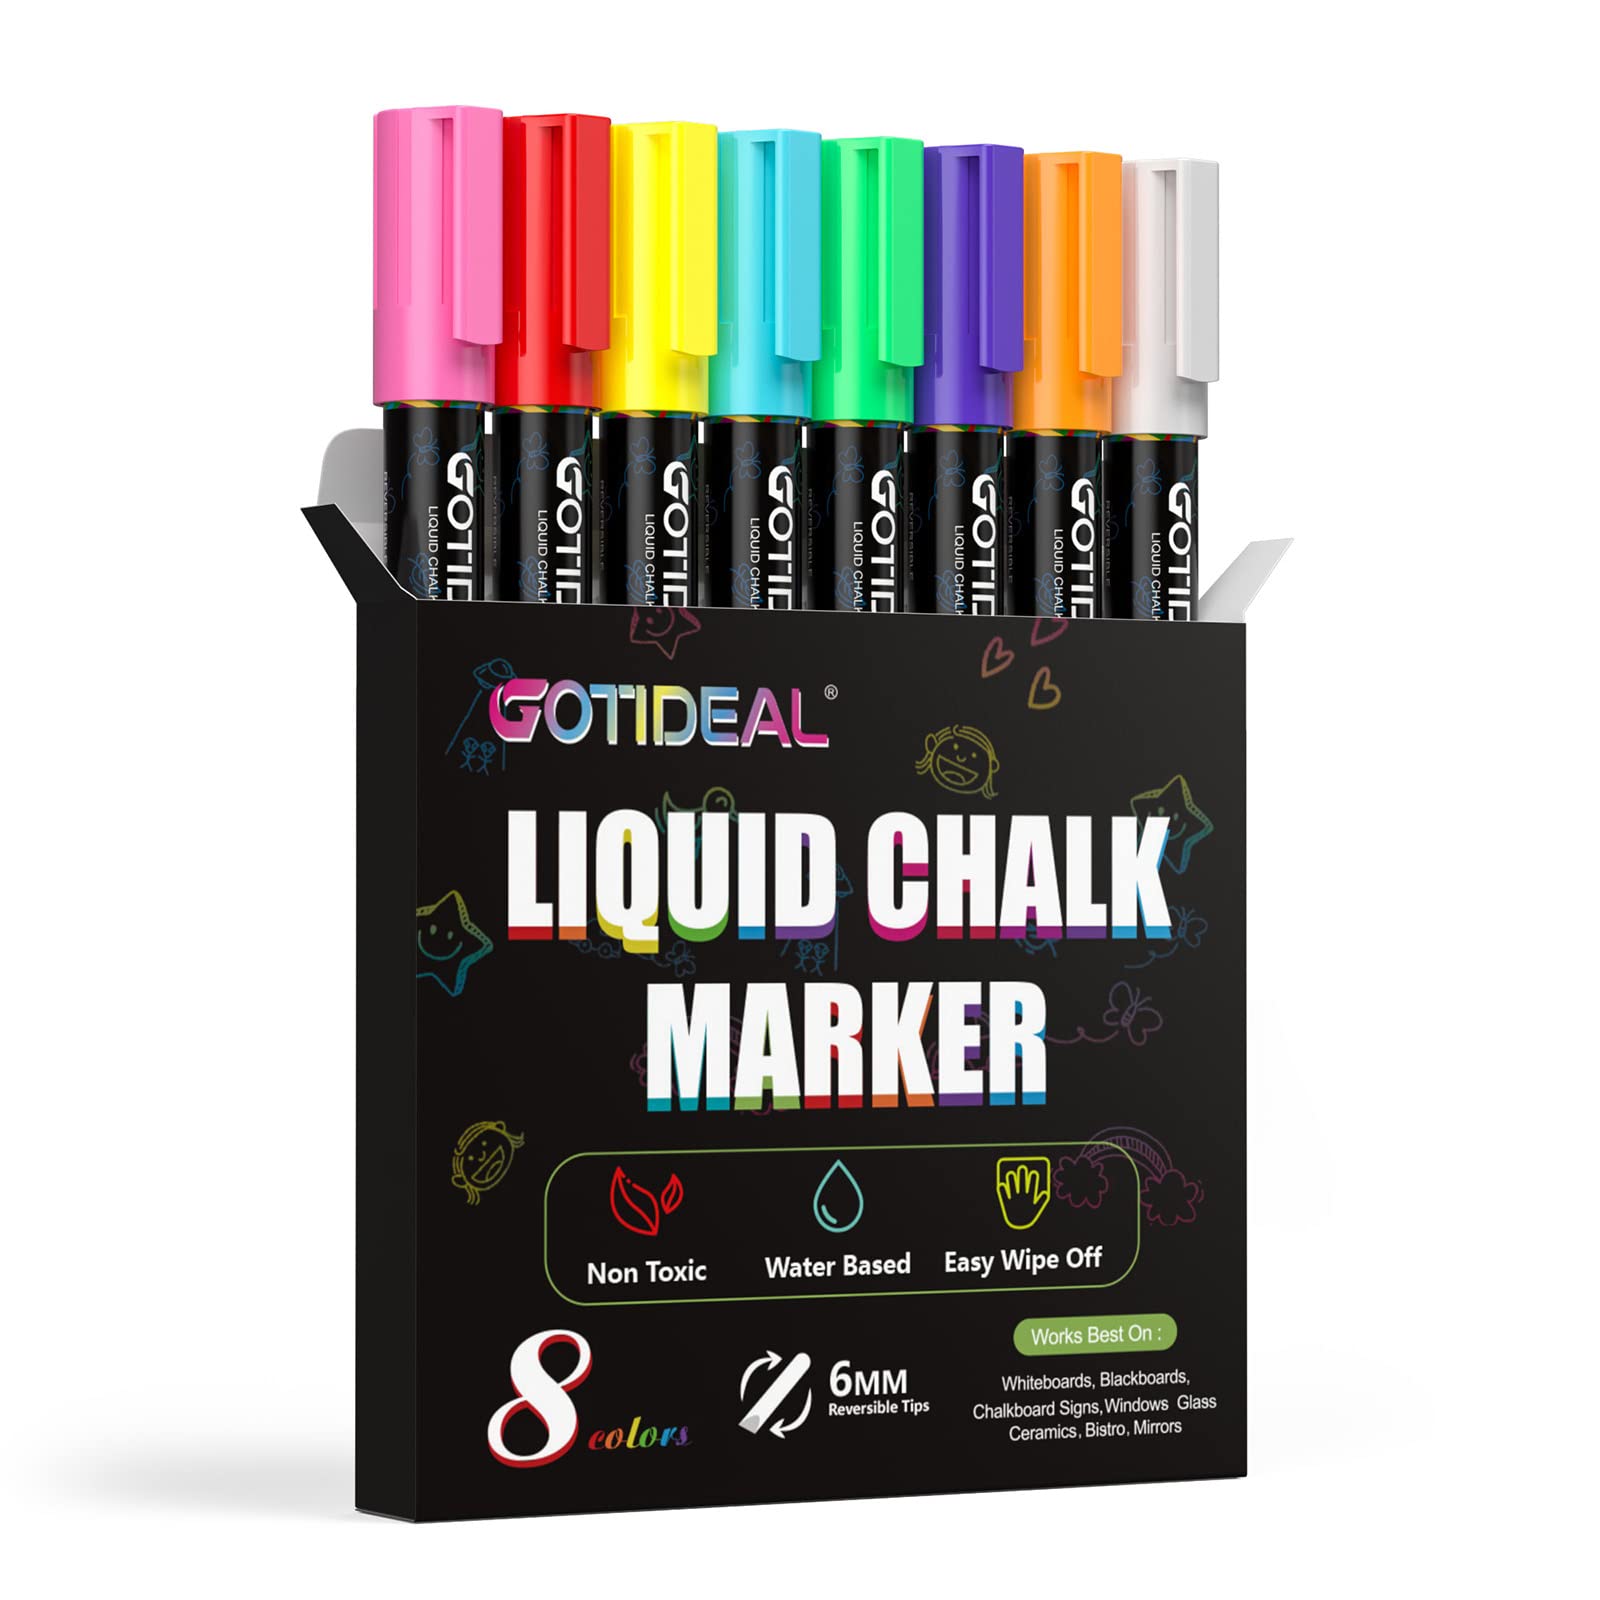 GOTIDEAL Liquid Chalk Markers Bold Tip 8 Colors Washable Window Chalkboard  Glass Pens Paint and Drawing for Car Blackboard & Bistro Kids and Adults  Non-Toxic Wet Erase - Reversible Tip 6mm-8 Colors